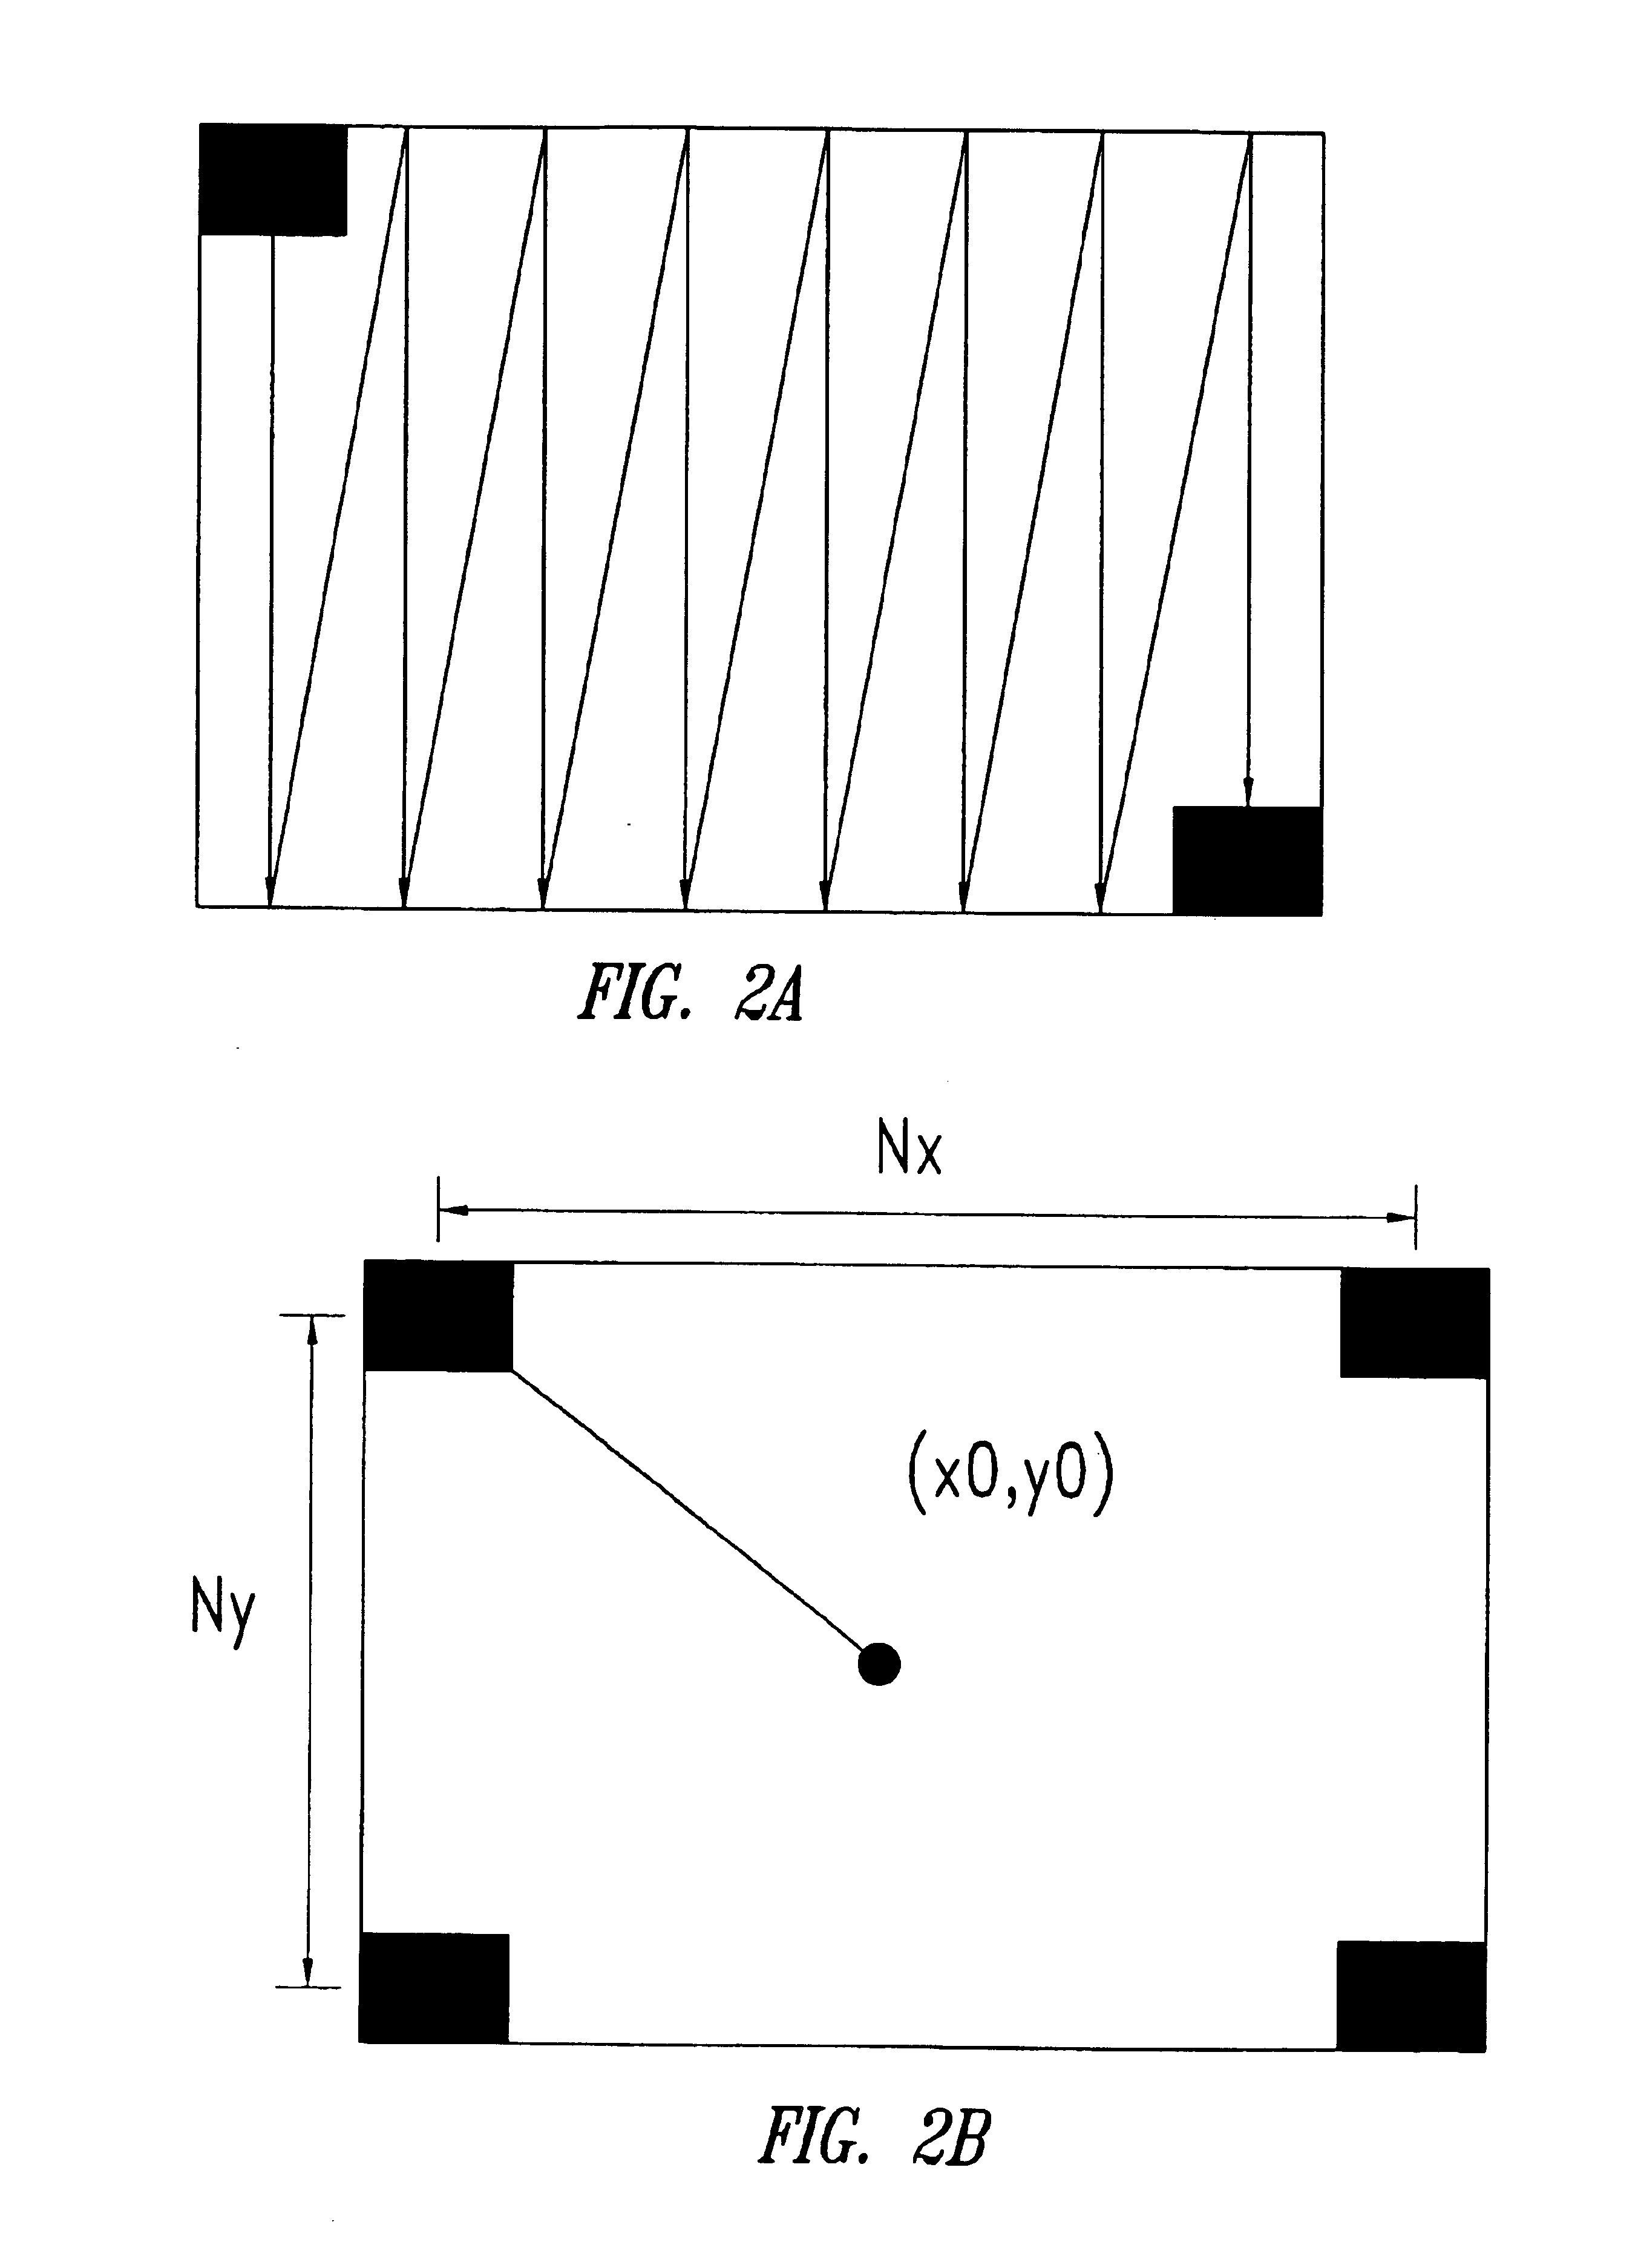 Motion vector selection based on a preferred point